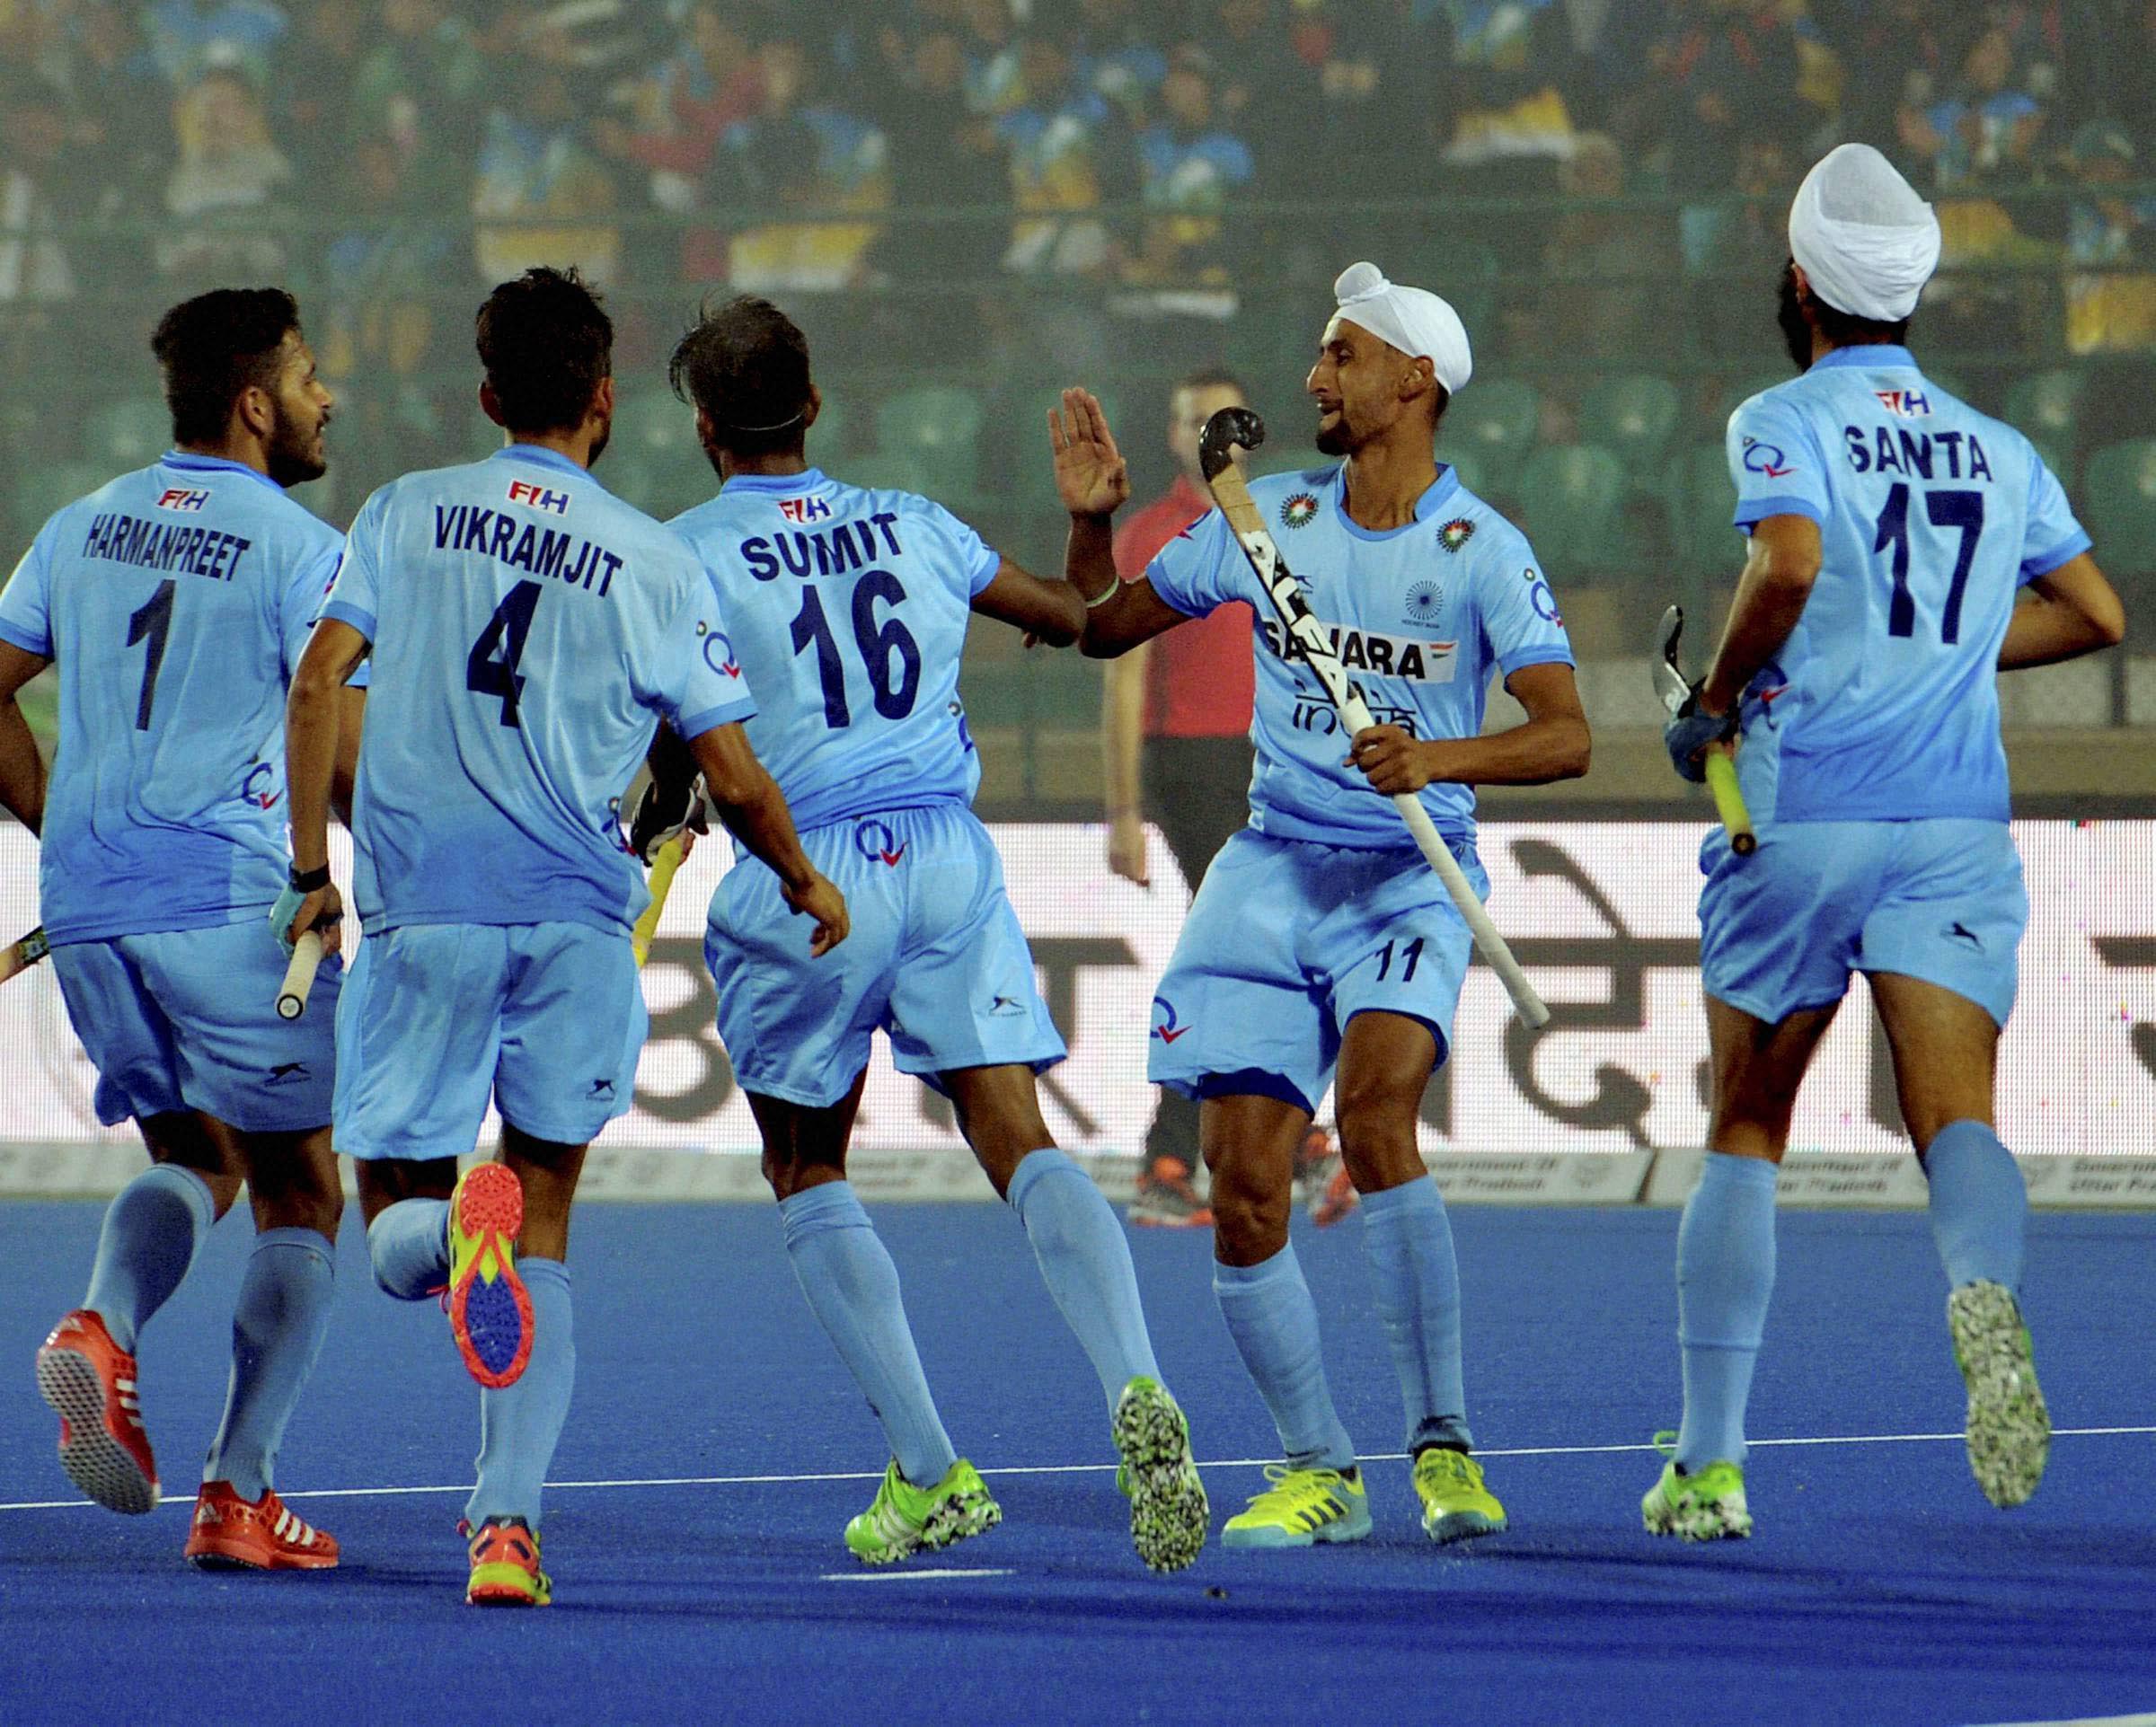 India v/s England Junior Hockey World Cup Live Streaming and where to watch in India